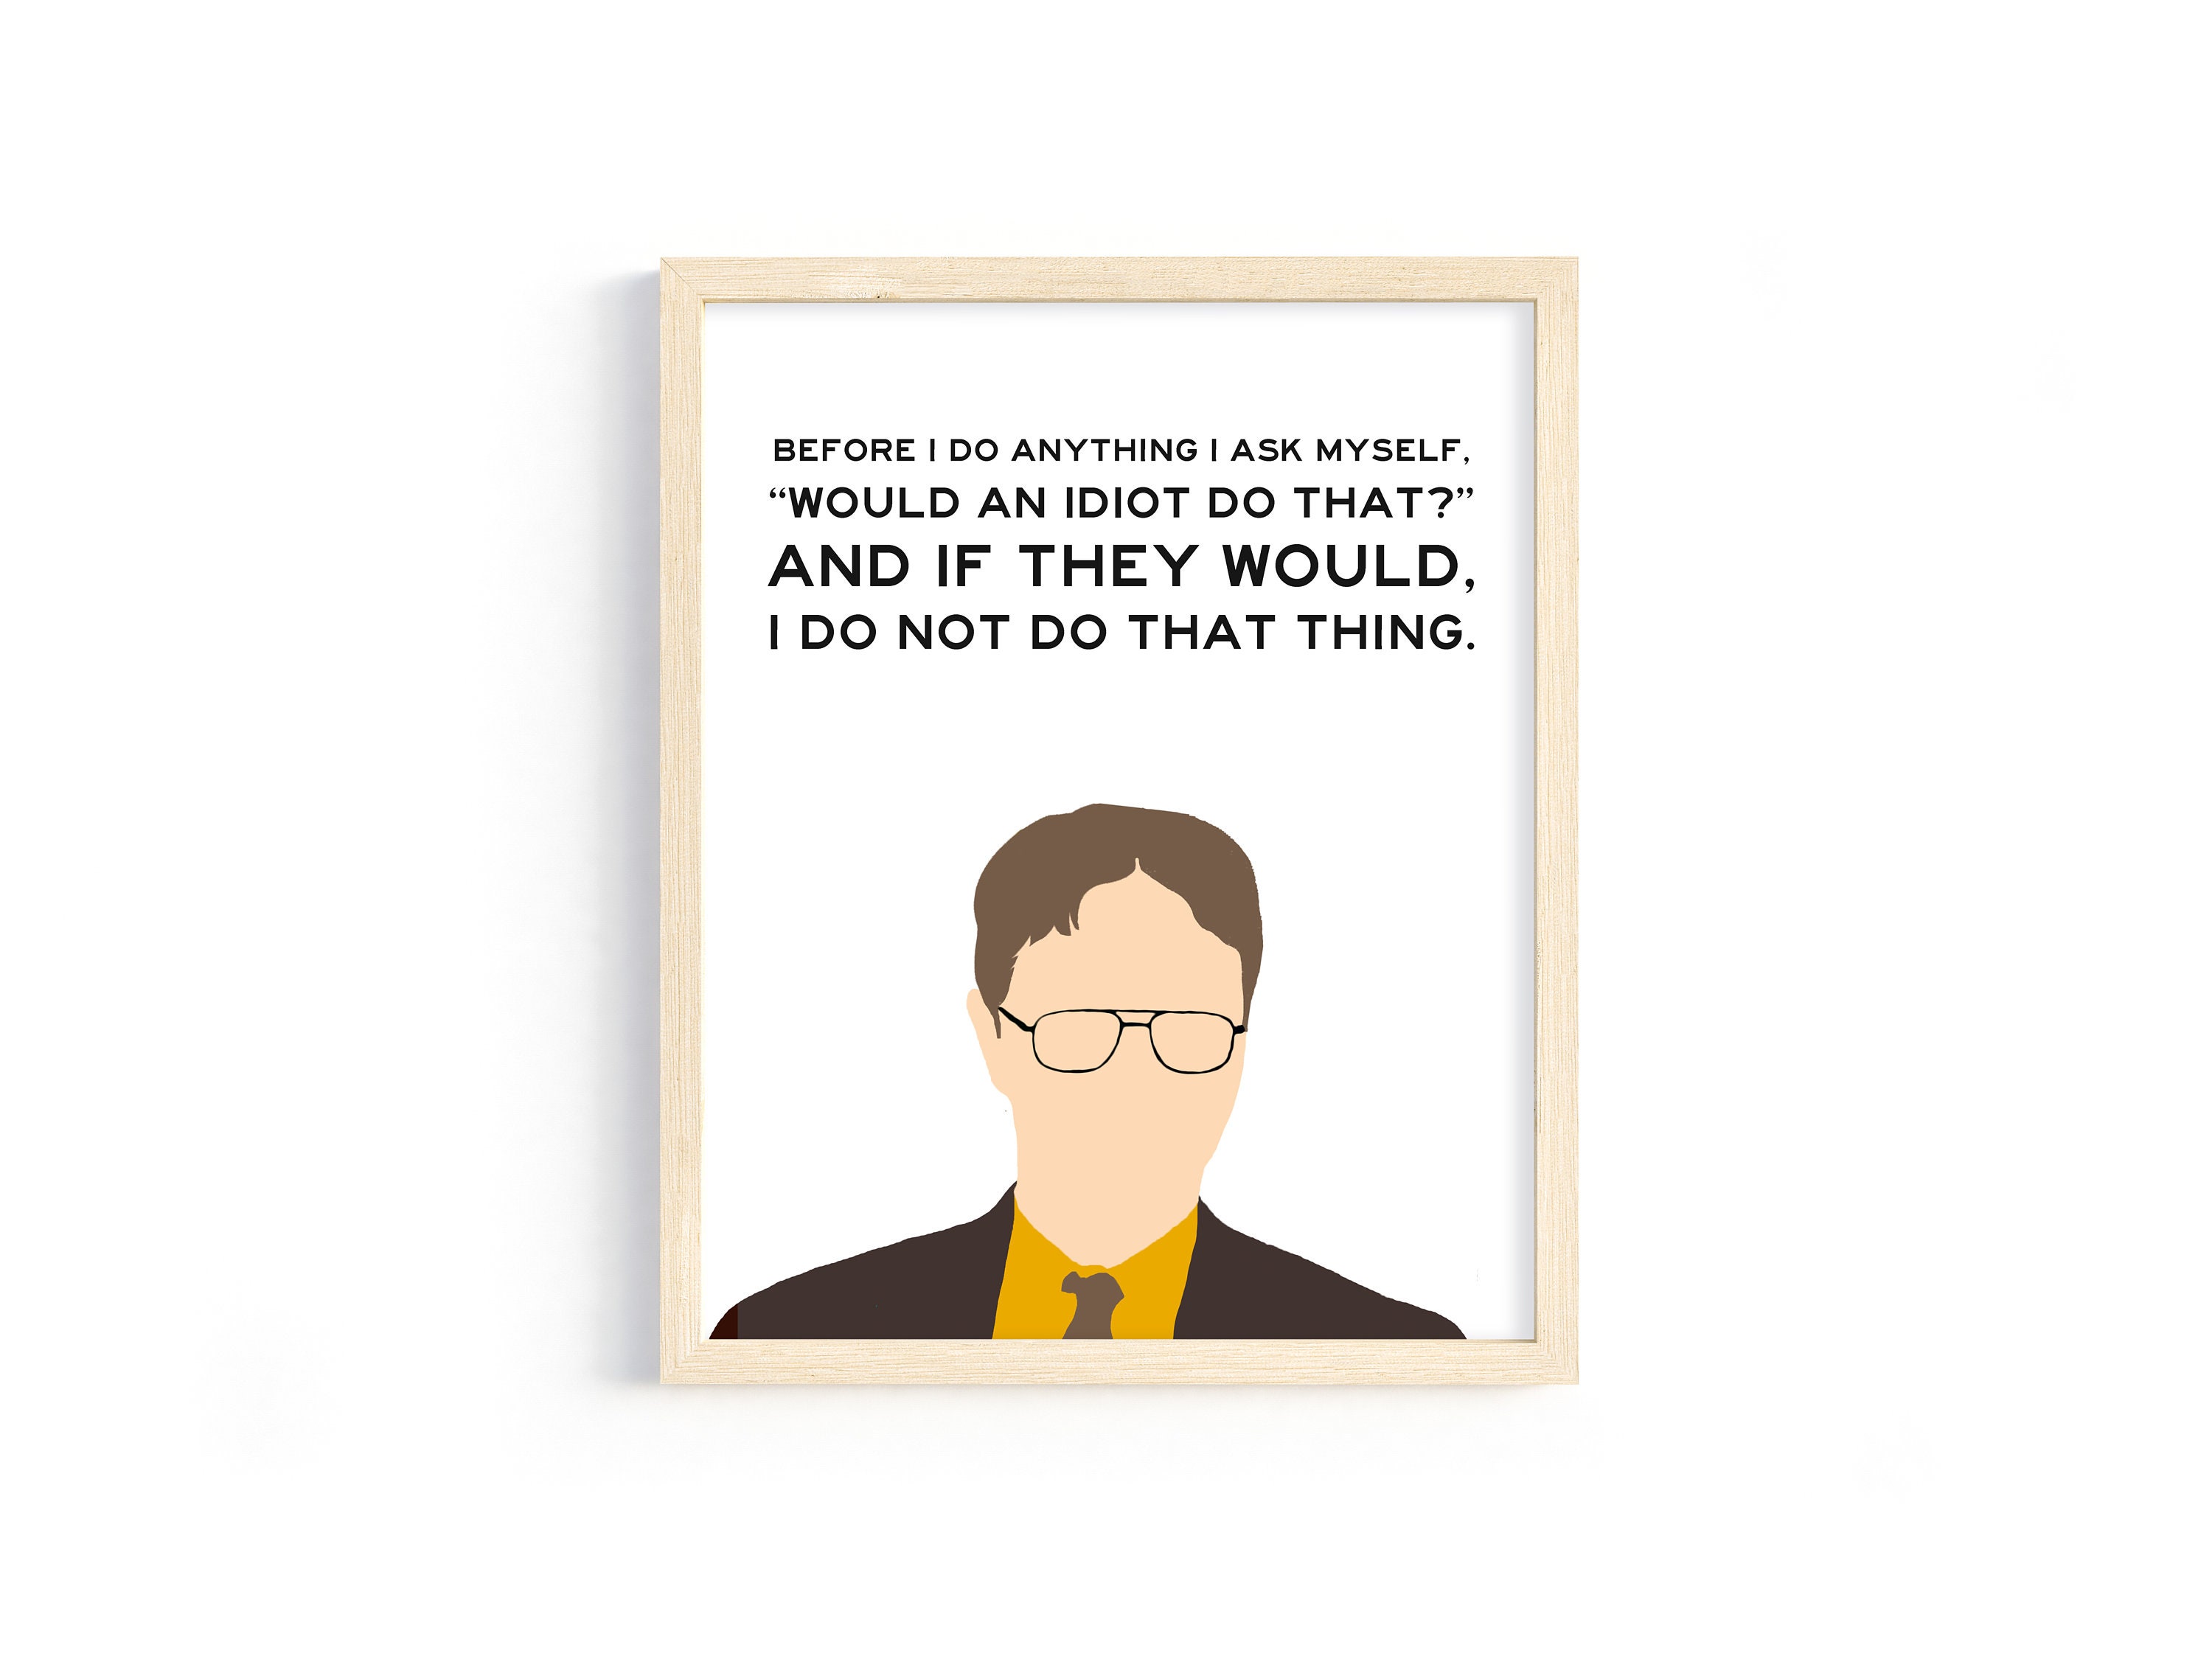 Dwight Digital Art Dwight Shrute Poster Dwight Schrute Business Life Quote Art Print from The Office TV Show